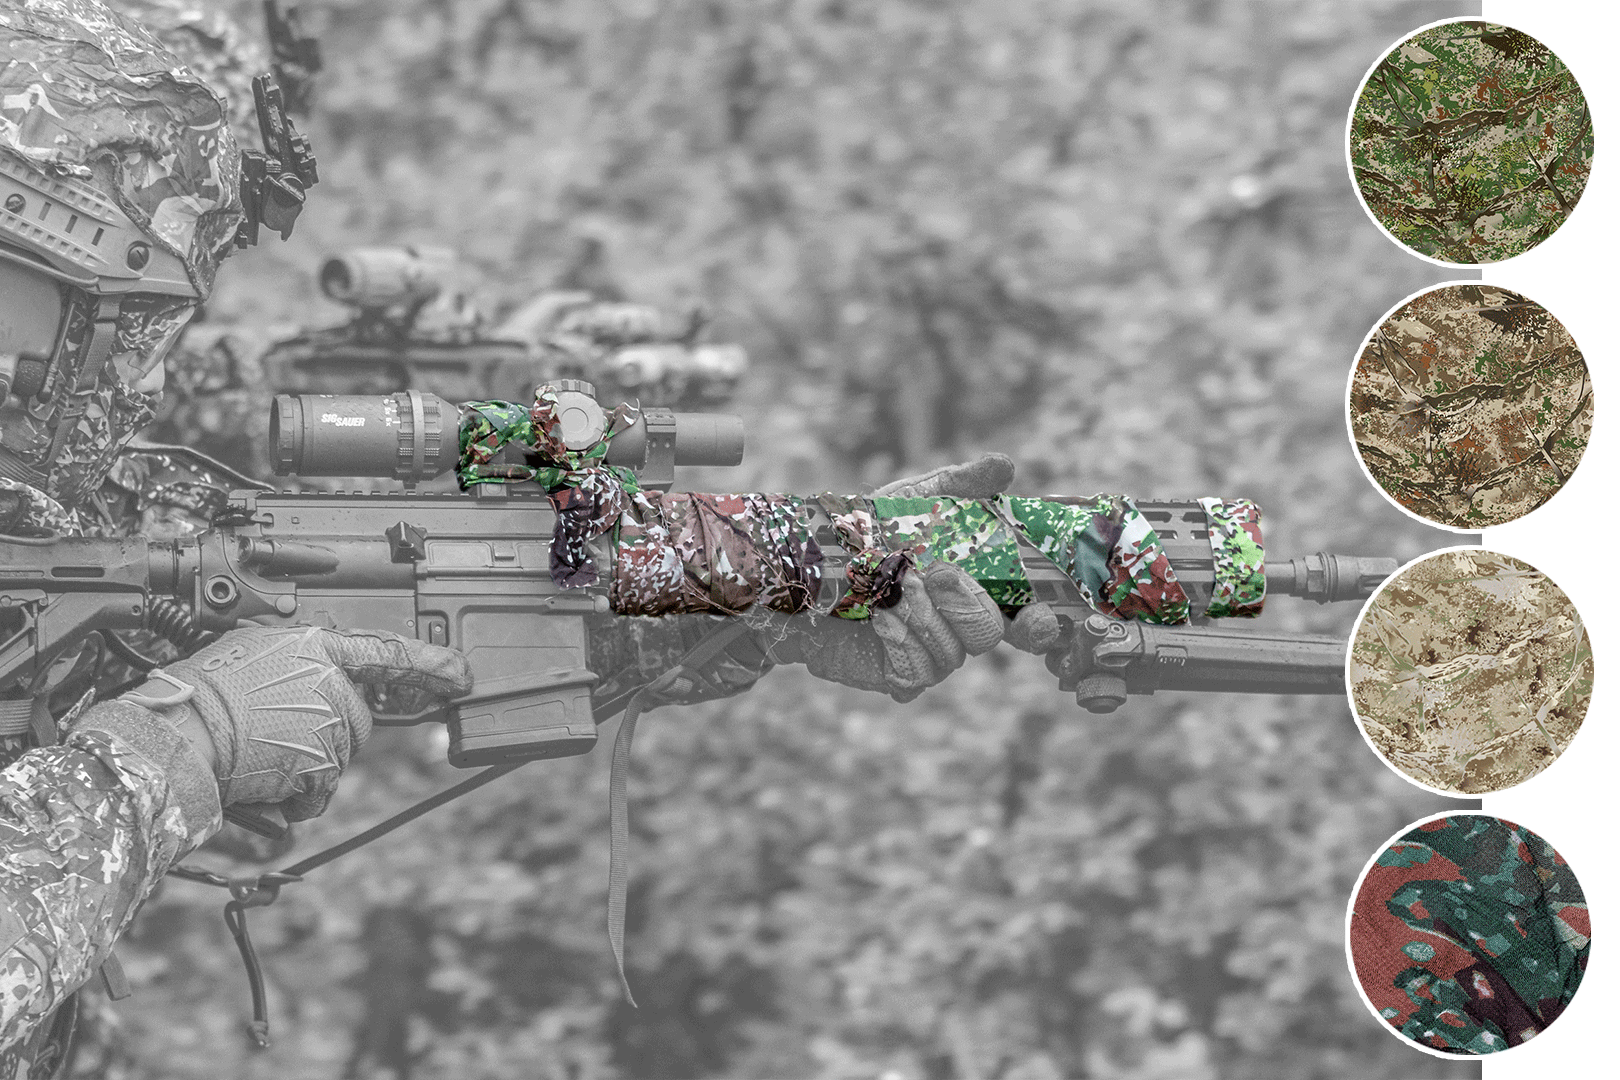 - to or weapons - Strip8 knot garland Camouflage to GHOSTHOOD equipment wrap and